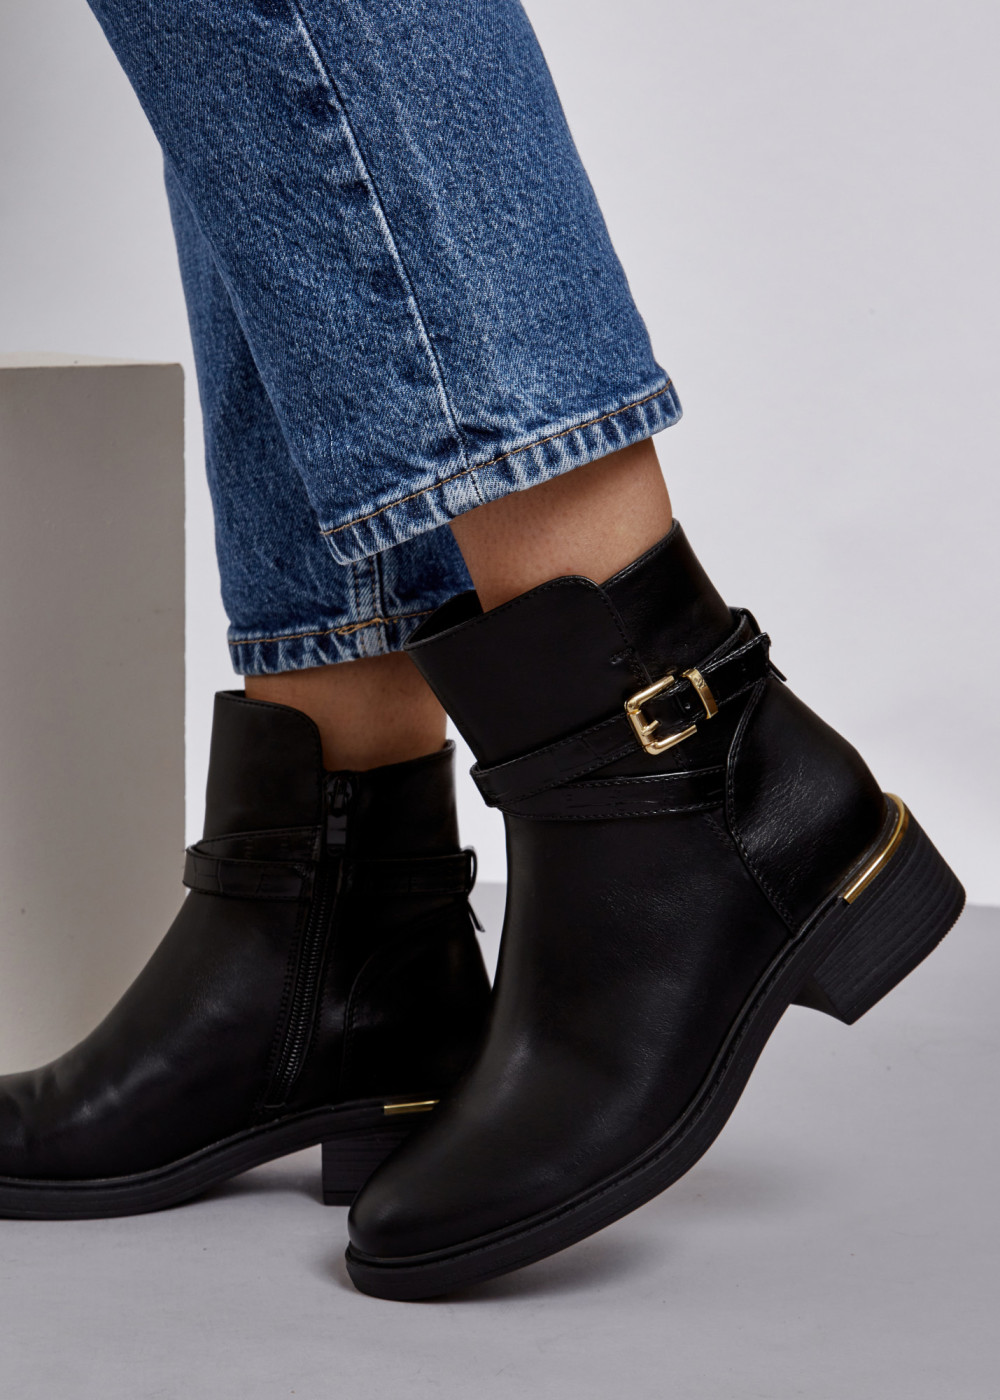 Black cross strap buckle detail ankle boots 4